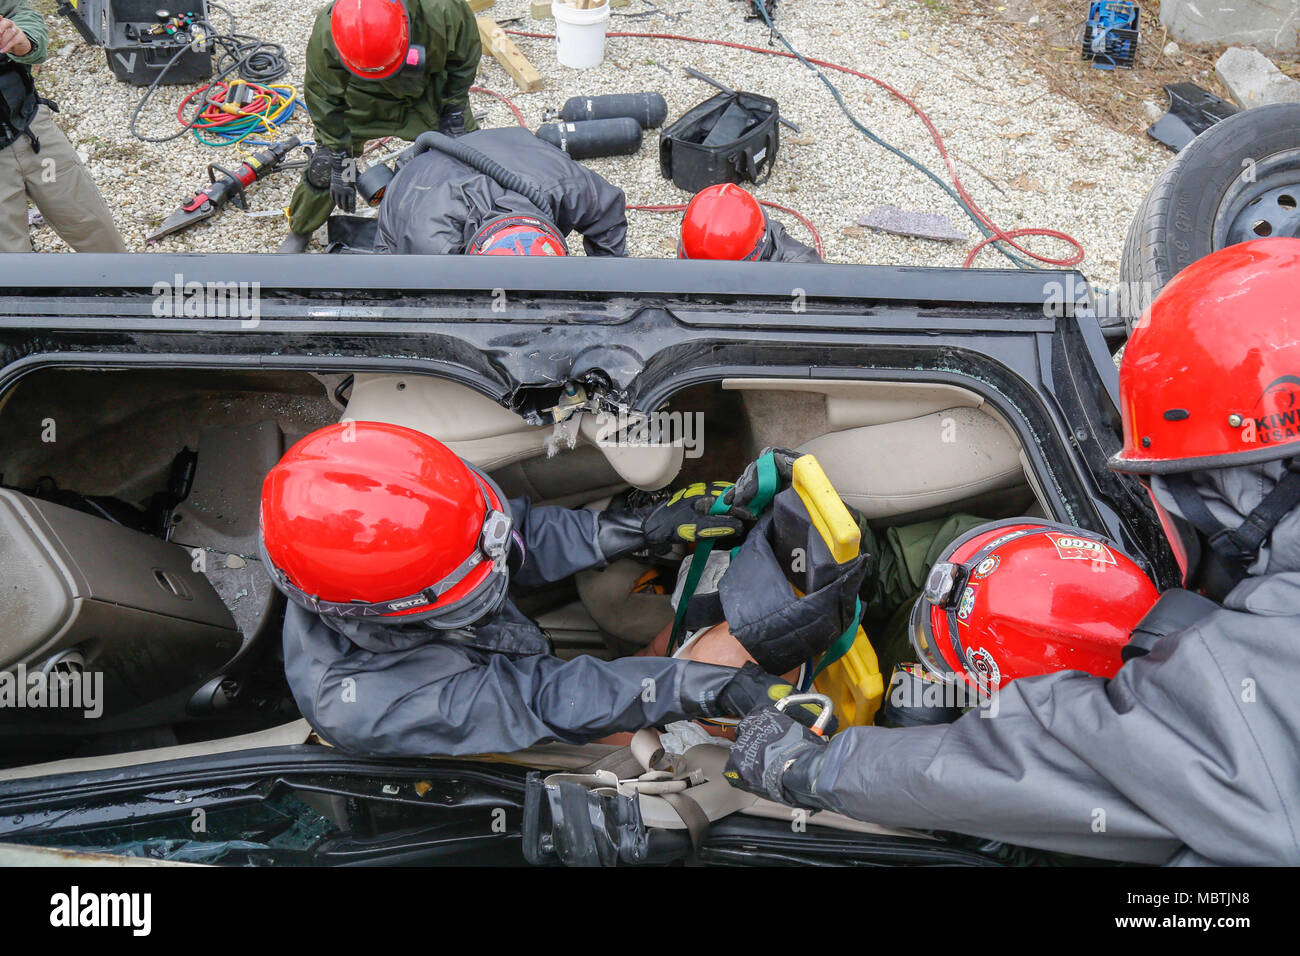 U. S. Army Reserve Soldiers assigned to 424th engineer Company extract a dummy casualty from an overturned vehicle in a Joint Training Exercise on Miami-Dade Fire Rescue Urban Search and Rescue Training Site in Miami, Fla. Jan. 10, 2018. This JTE focused on building response capabilities and seamless transition between the local first responders and the follow-on support provided by the National Guard and Active duty soldiers. (U. S. Army Photo by Spc. Andrea Salgado Rivera) Stock Photo